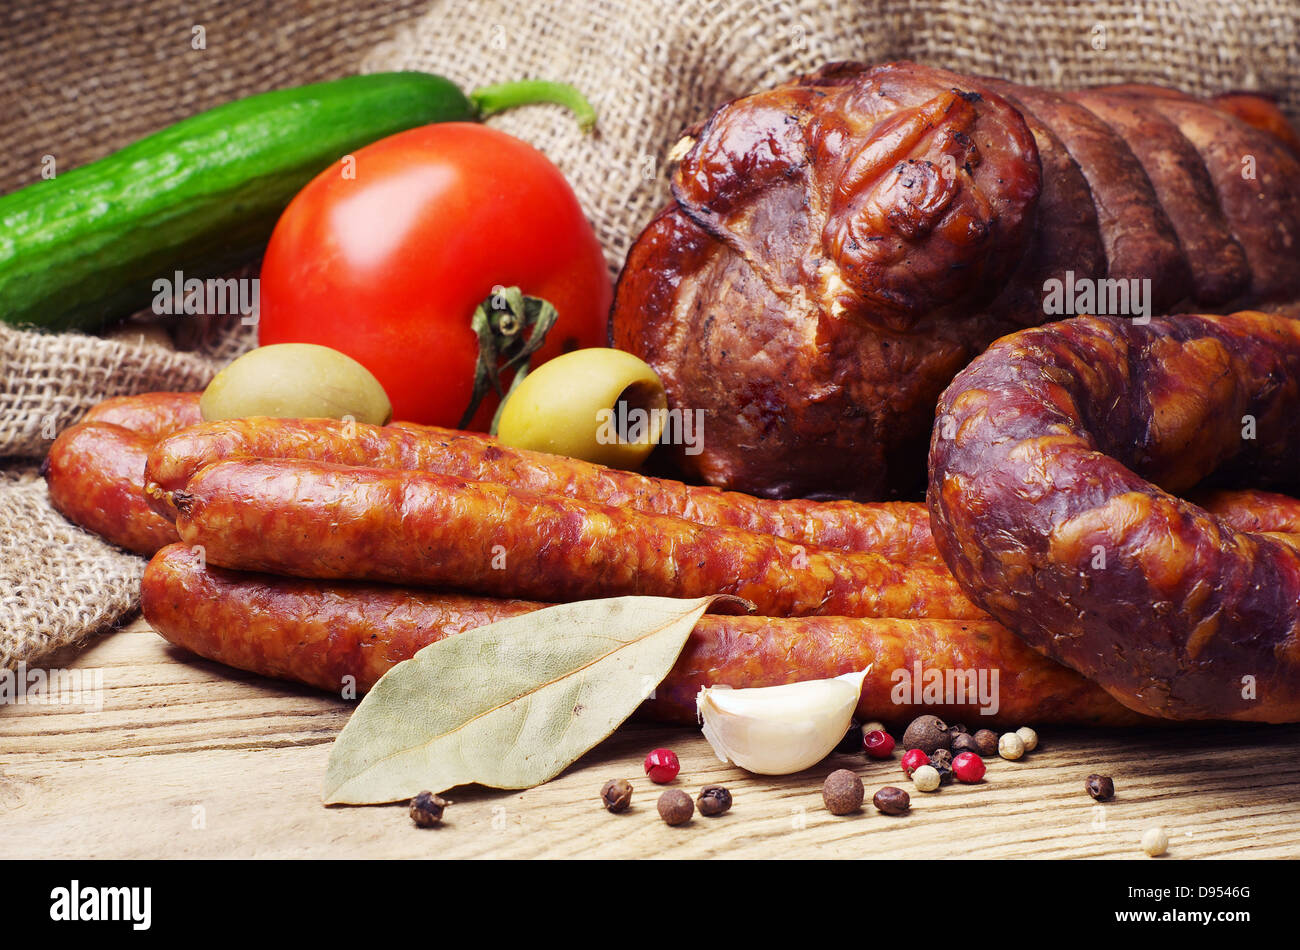 Smoked sausage, meat and vegetables on wooden table Stock Photo